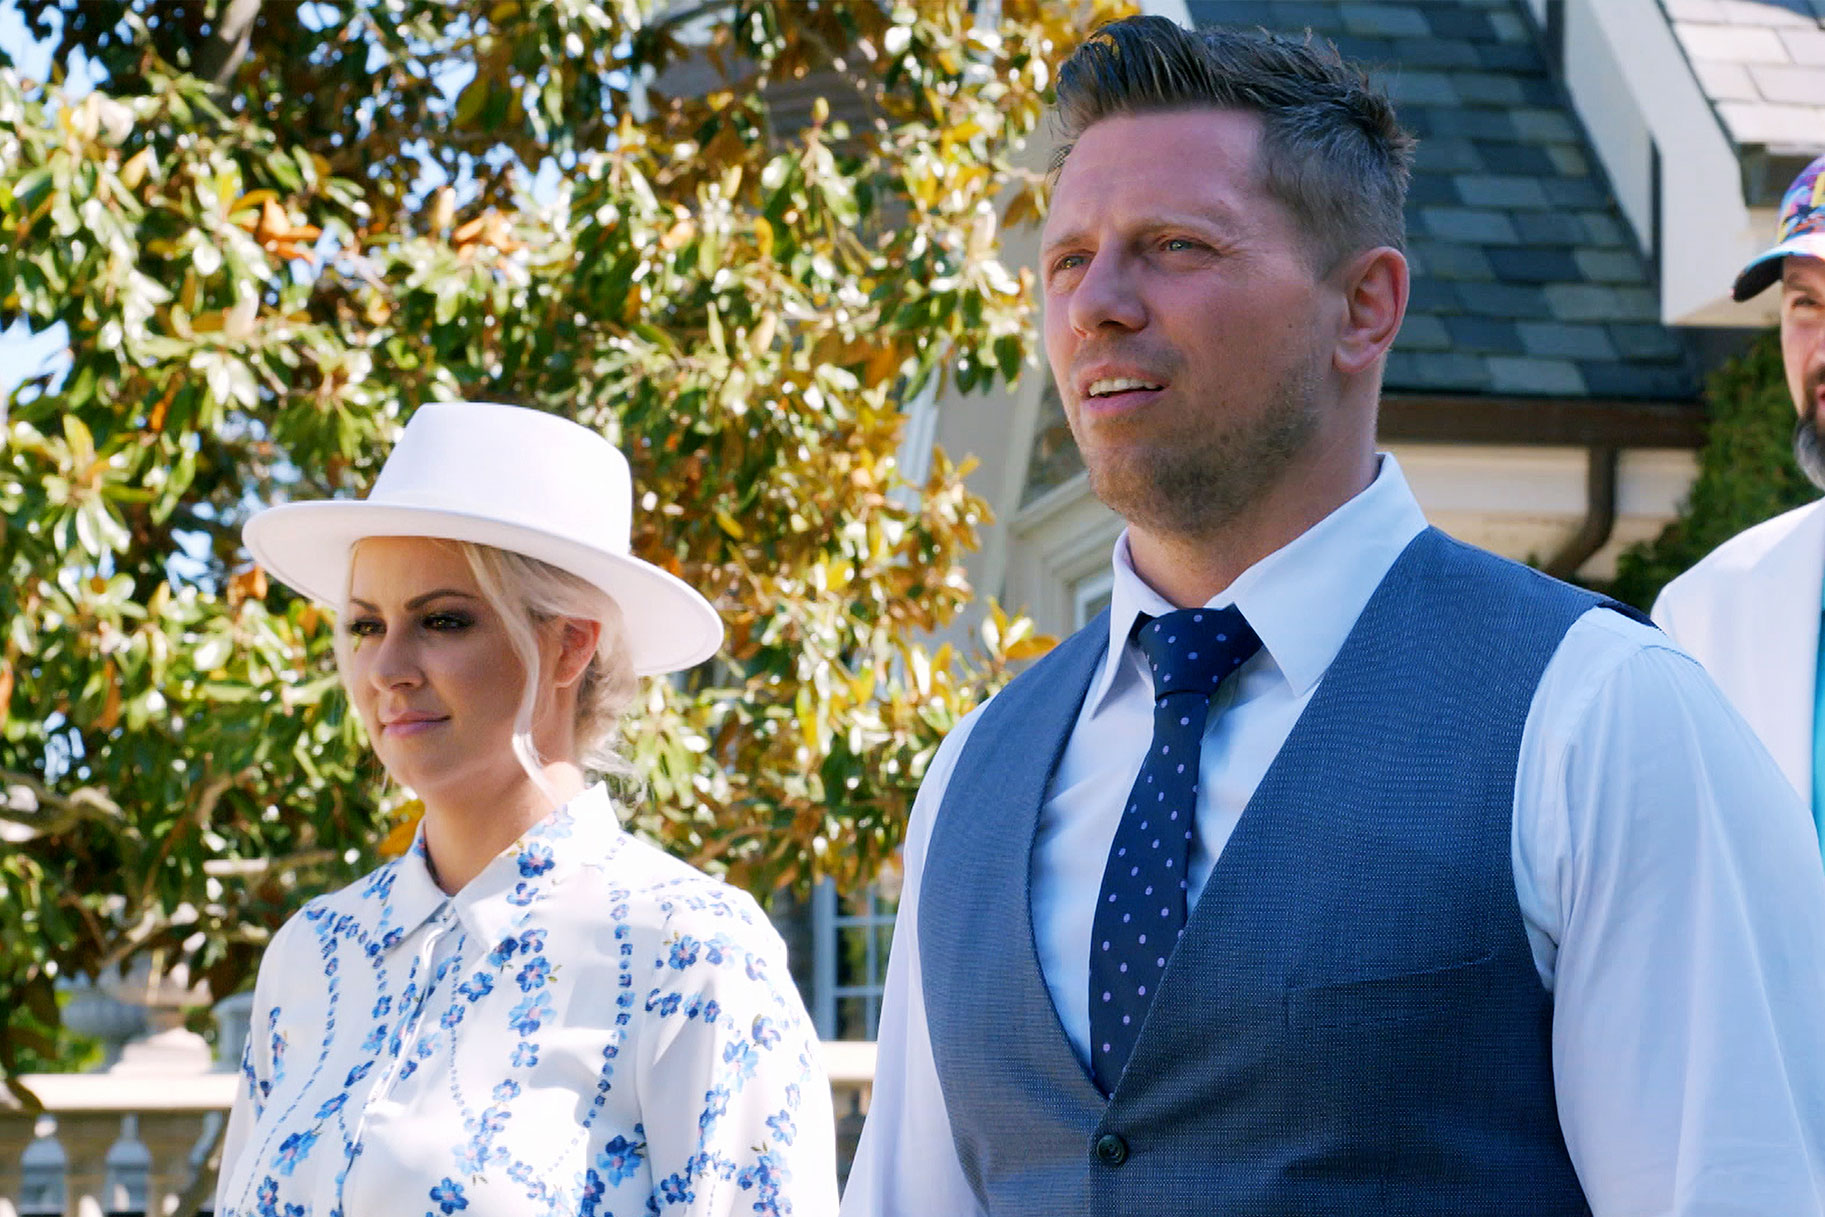 Miz and his wife standing in their backyard on a sunny day